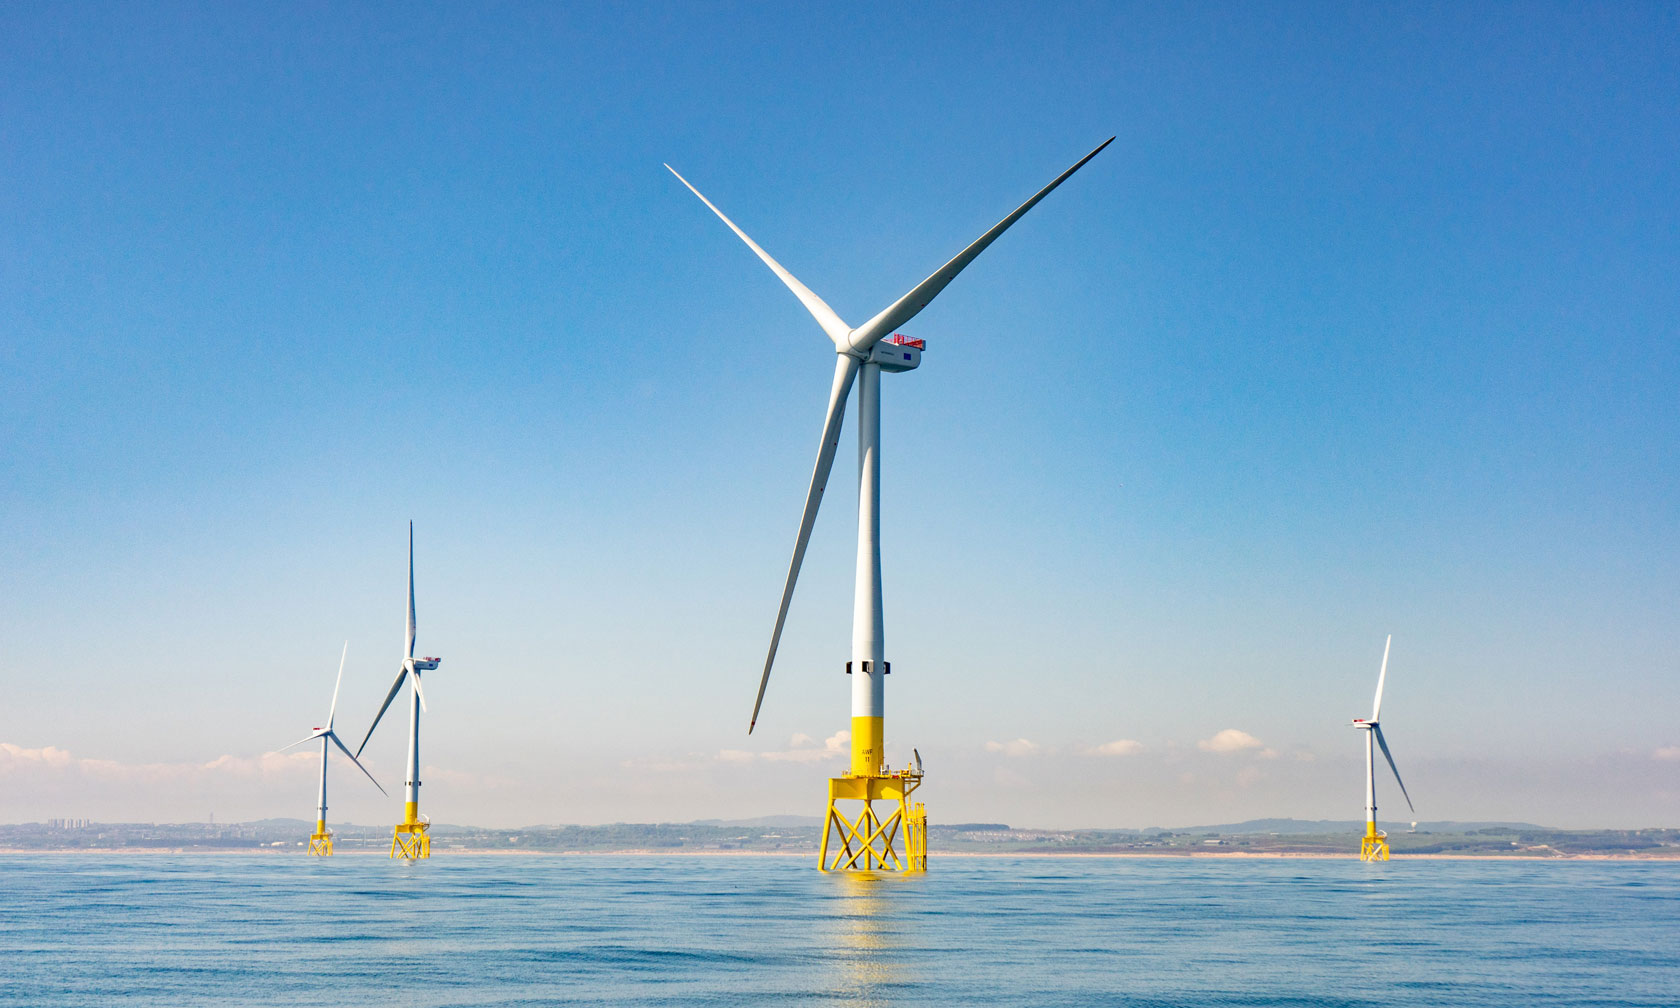 Vattenfall is developing another large wind power project off the coast of Germany